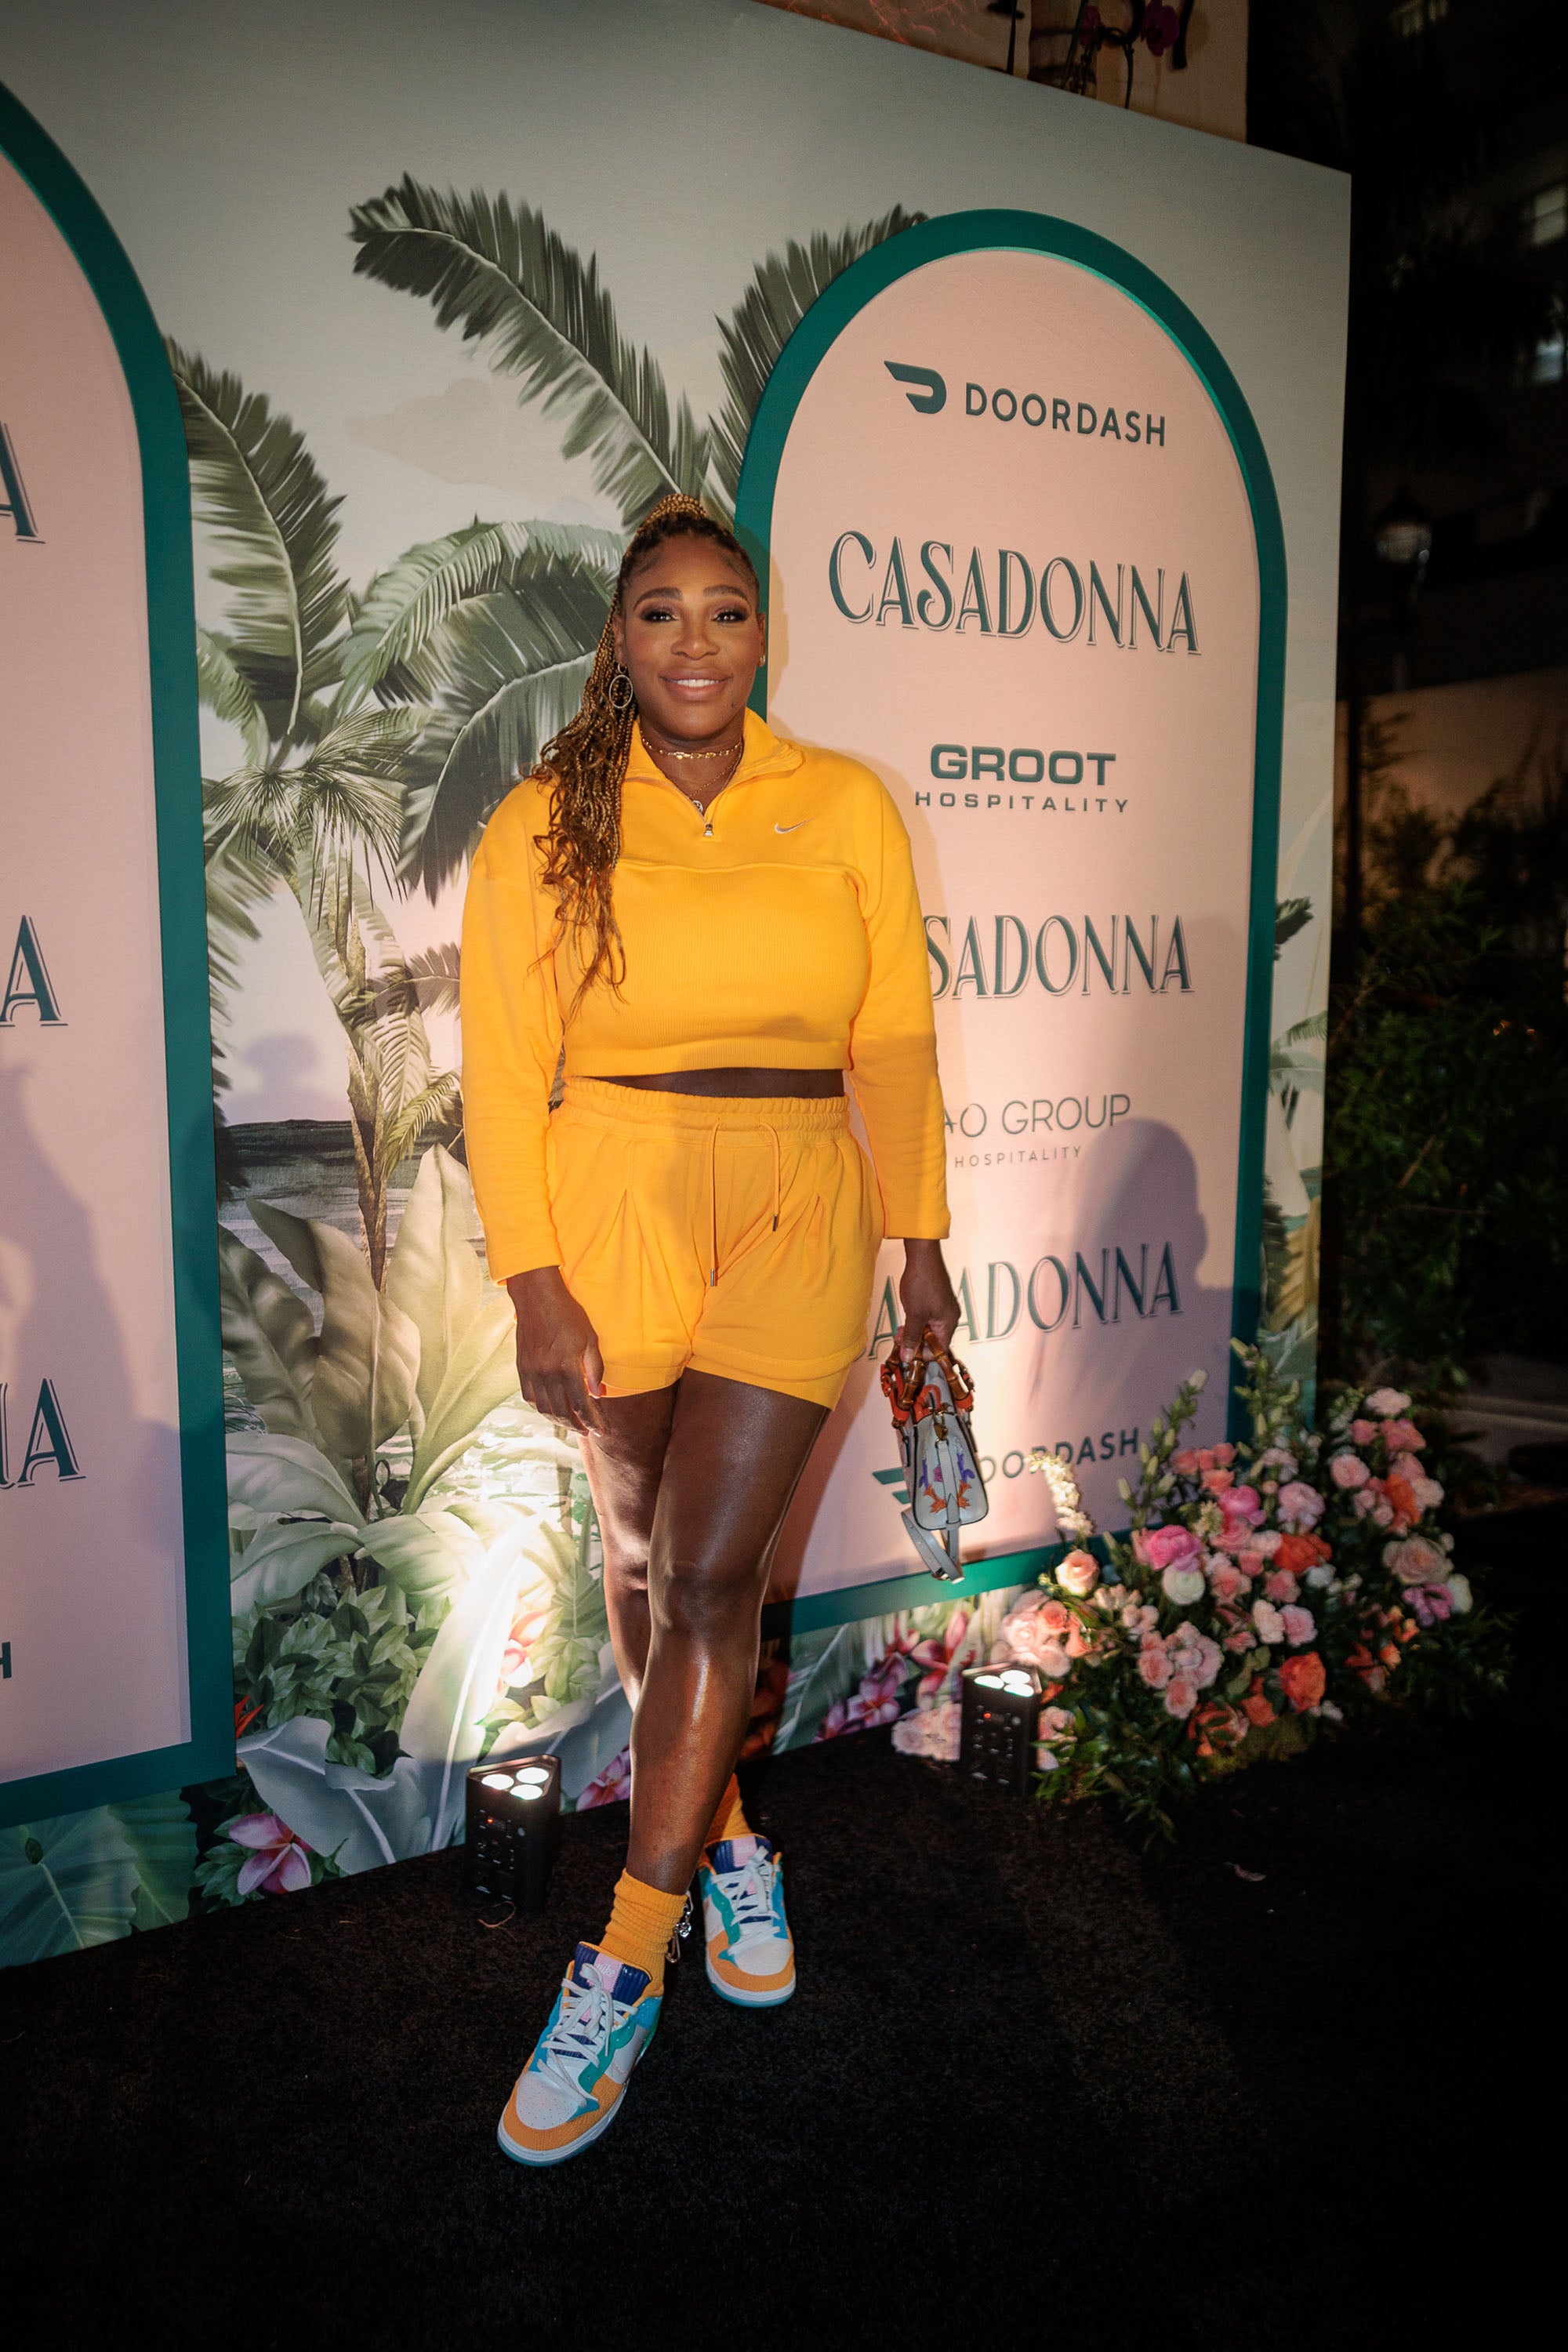 Serena Williams Praises 'Loving Yourself' as She Embraces Her Postpartum  Body: 'Well Worth It' : r/Fauxmoi